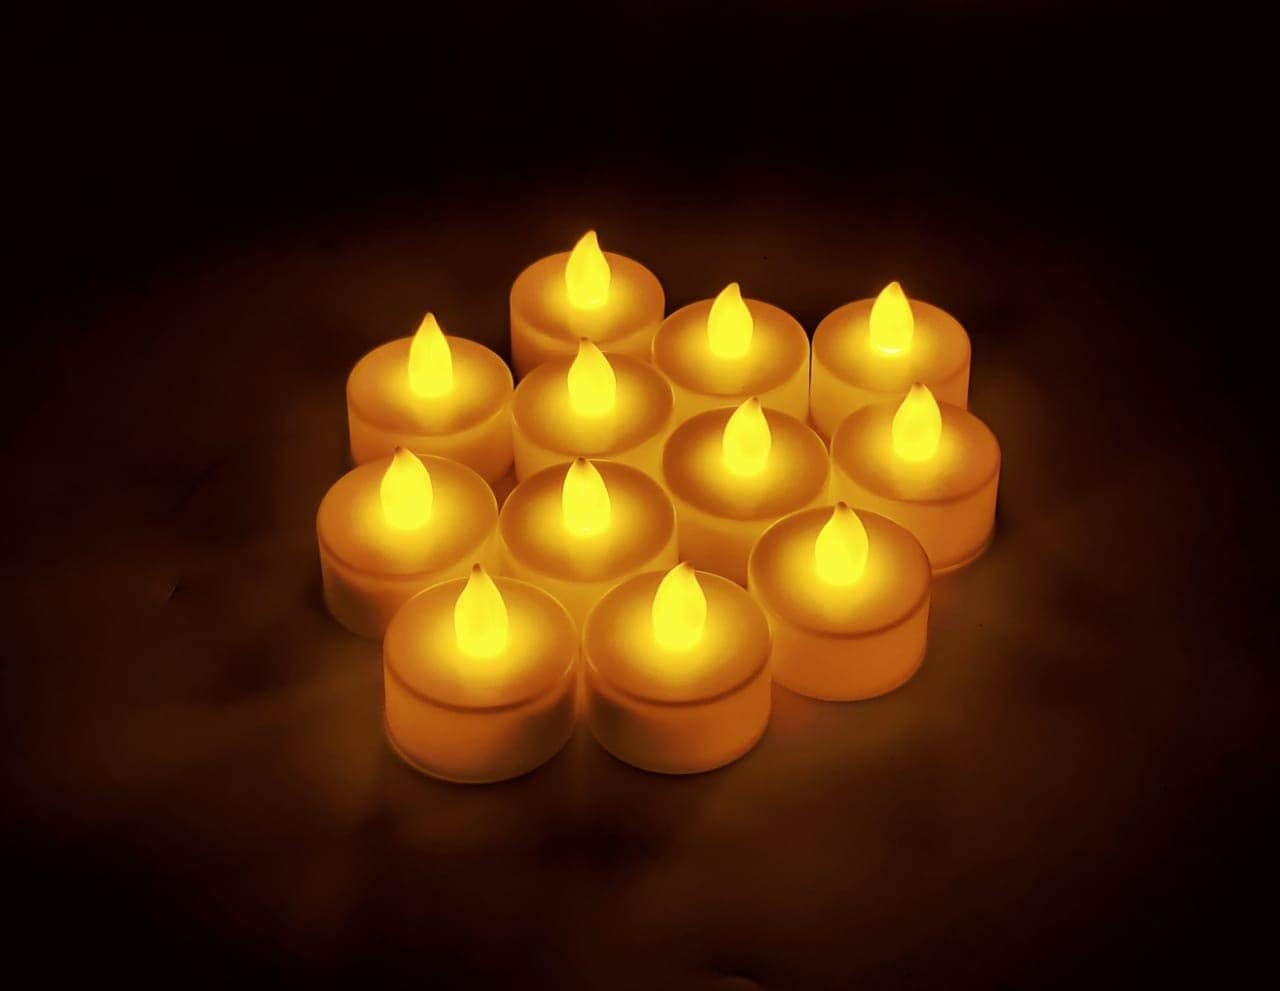 New Jaipur Handicraft led candles Pack of 500 LED Candles 🕯at Rs 20 each / Flameless 🔥Electric LED Candles for Diwali / Candles for Home 🏠Decoration